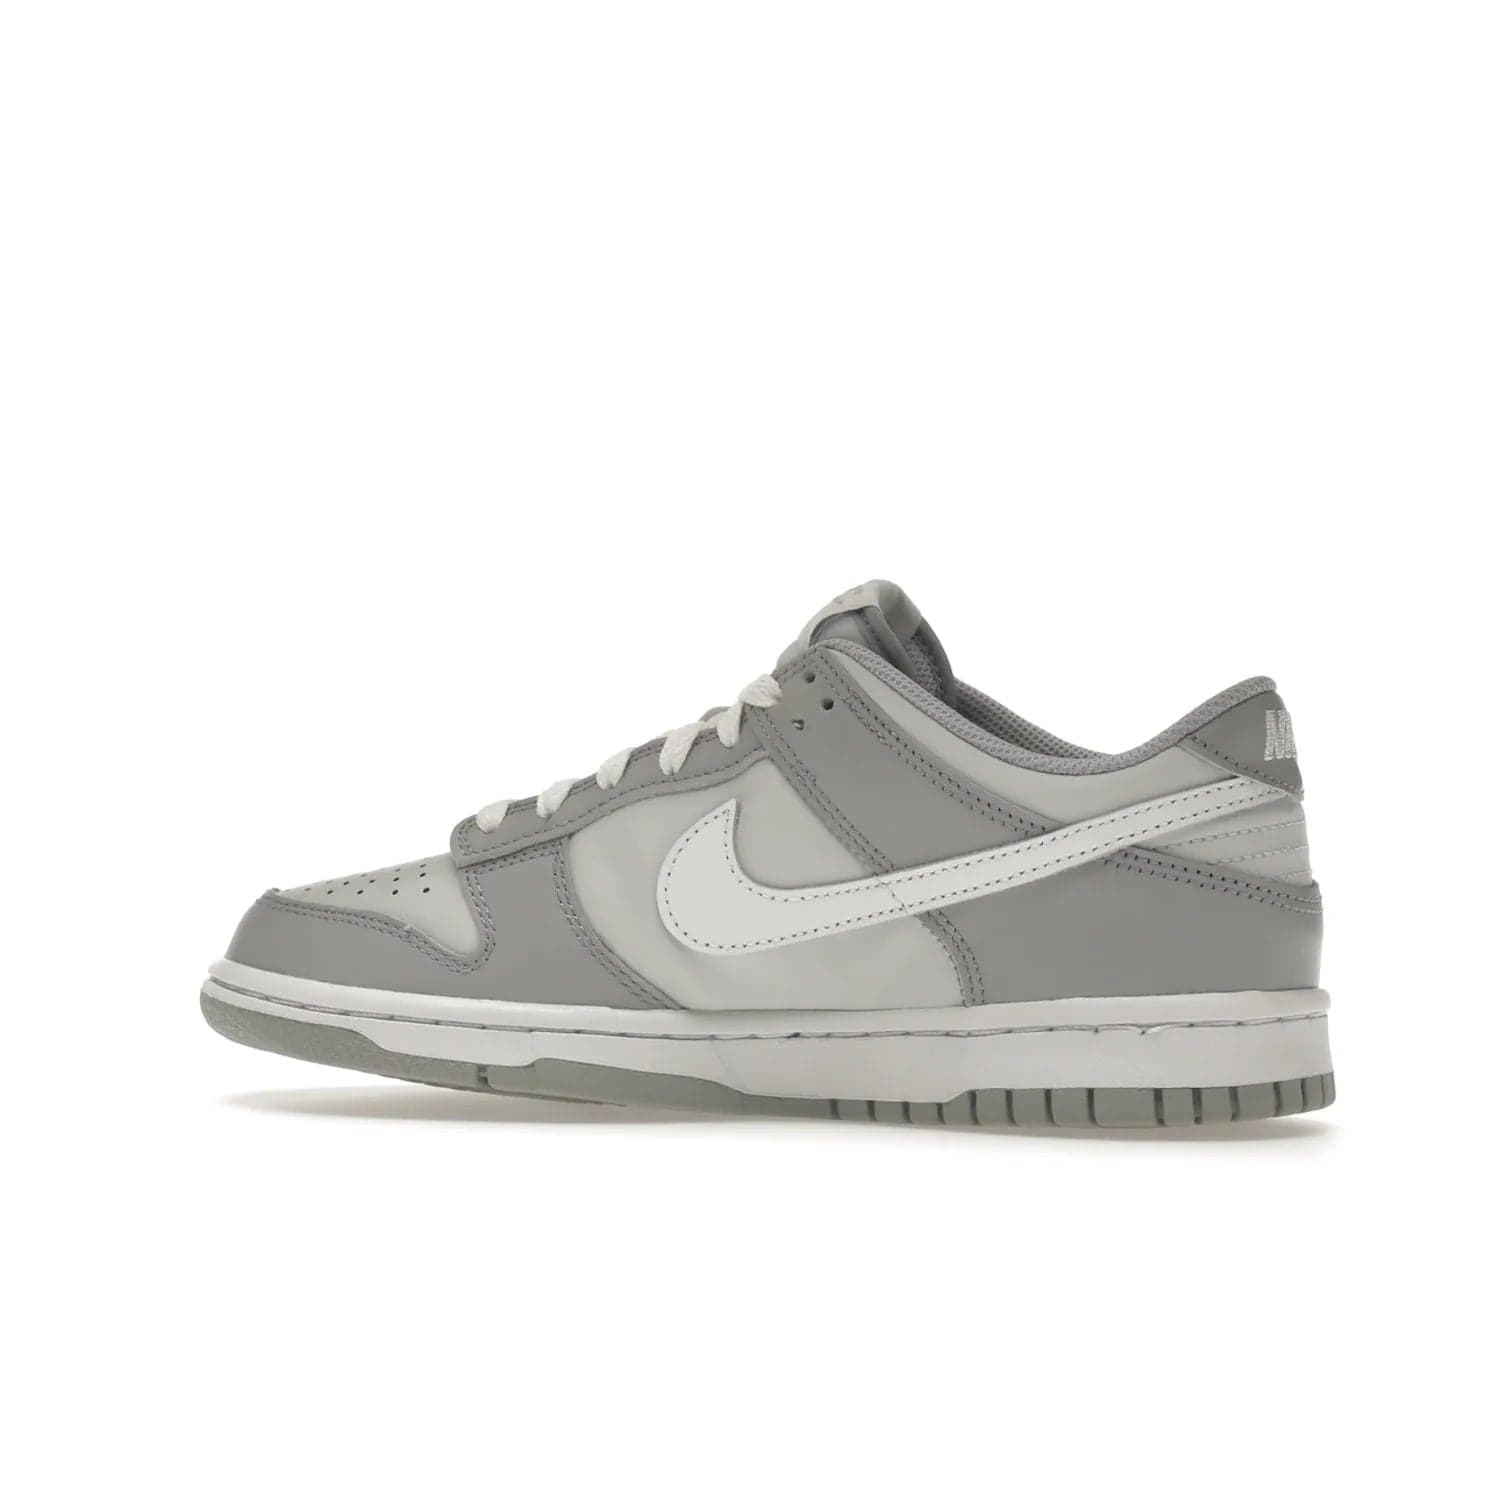 Nike Dunk Low Two-Toned Grey (GS) - Image 21 - Only at www.BallersClubKickz.com - Stylish Nike Dunk Low GS Two-Toned Grey featuring leather build, light/dark grey shades, white Swoosh logo & gray rubber outsole. Get ready to make a statement with this timeless classic released in March 2022.